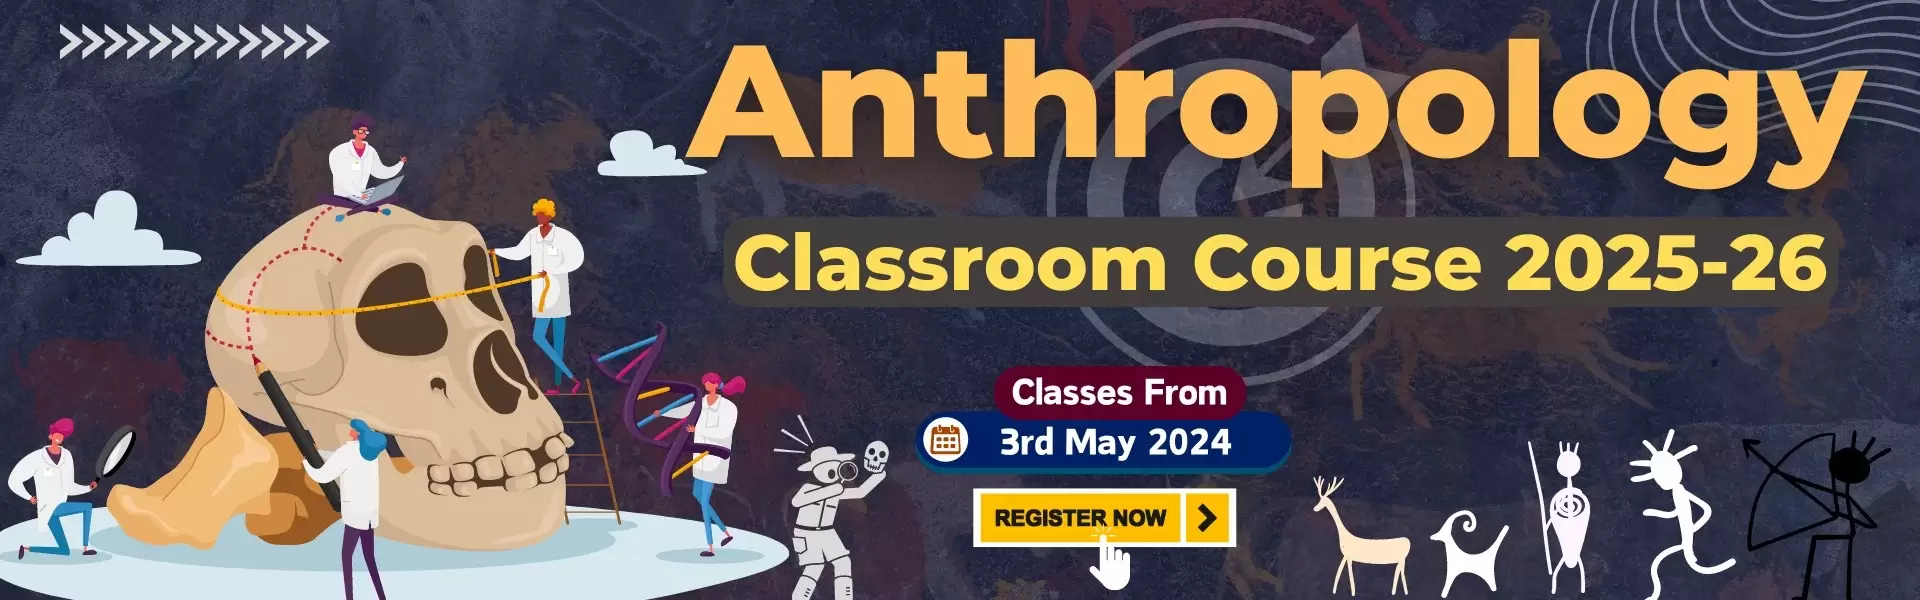 Anthropology Optional Foundation Course ACC